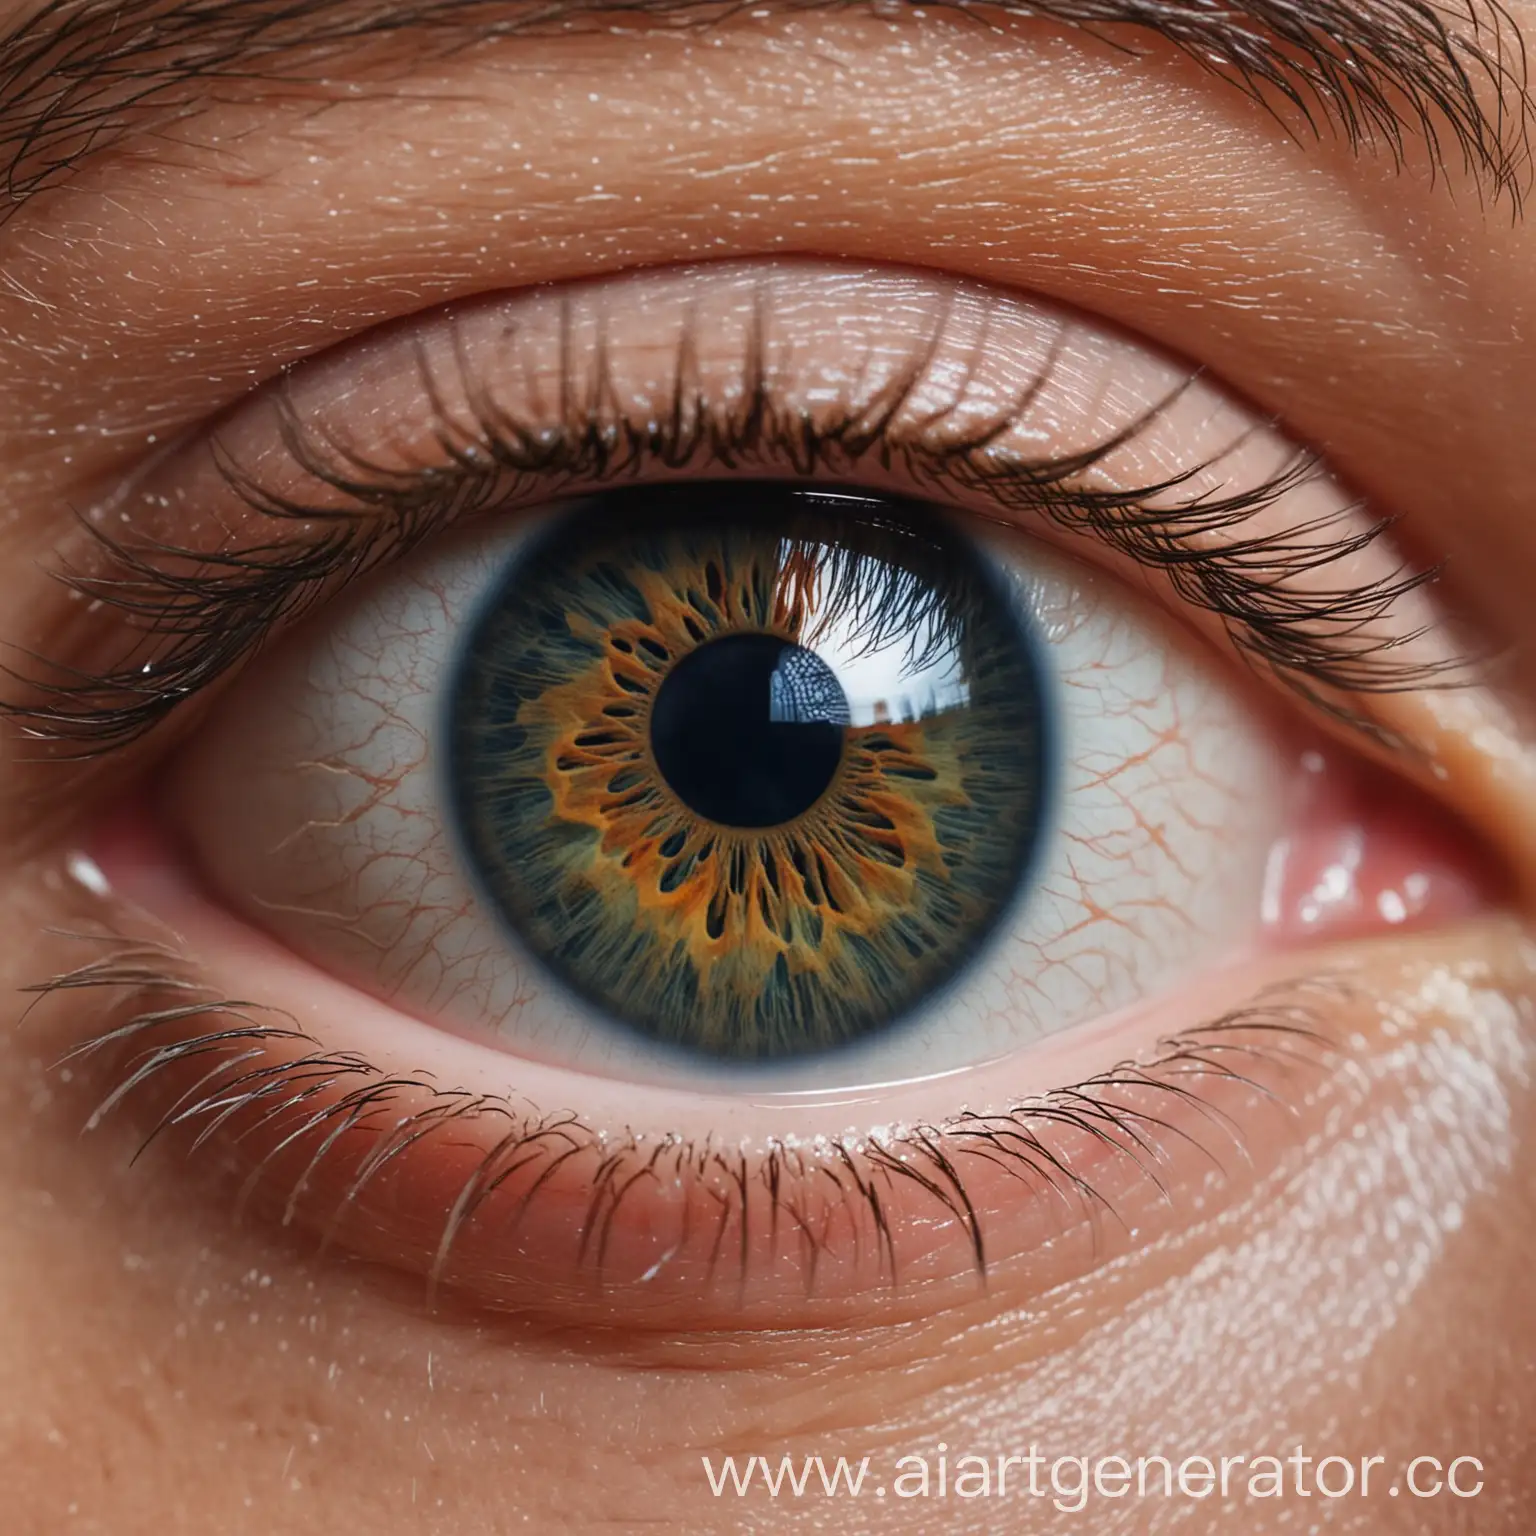 Mesmerizing-CloseUp-of-a-Human-Eye-with-Vivid-Colors-and-Intricate-Details